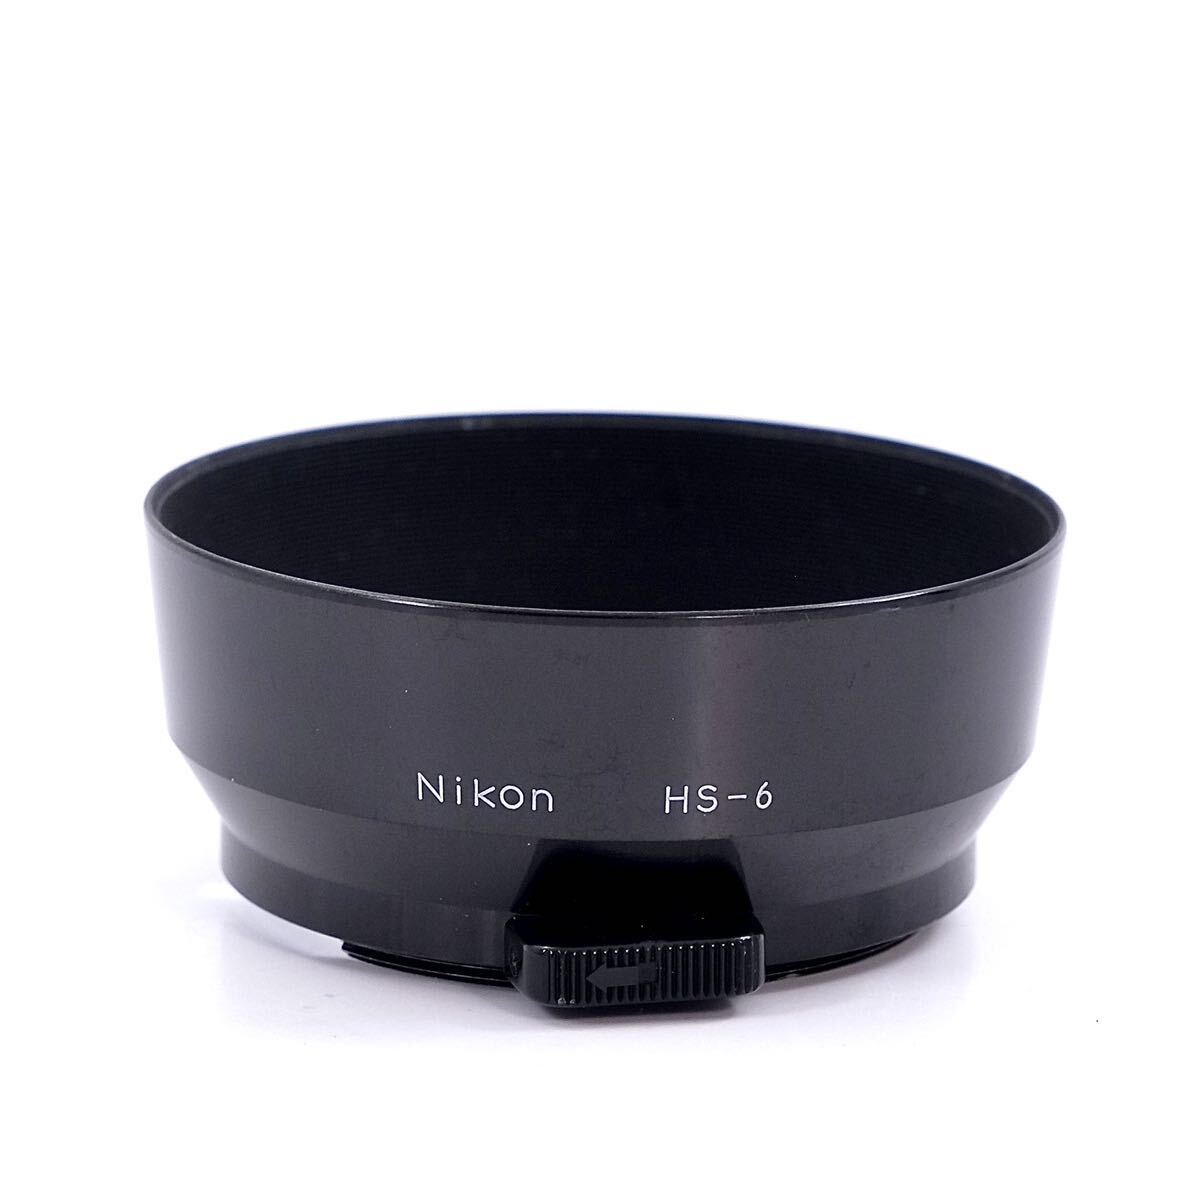 Nikon ニコン HS-6 Ai 50mm F2 用 メタルフード_画像1